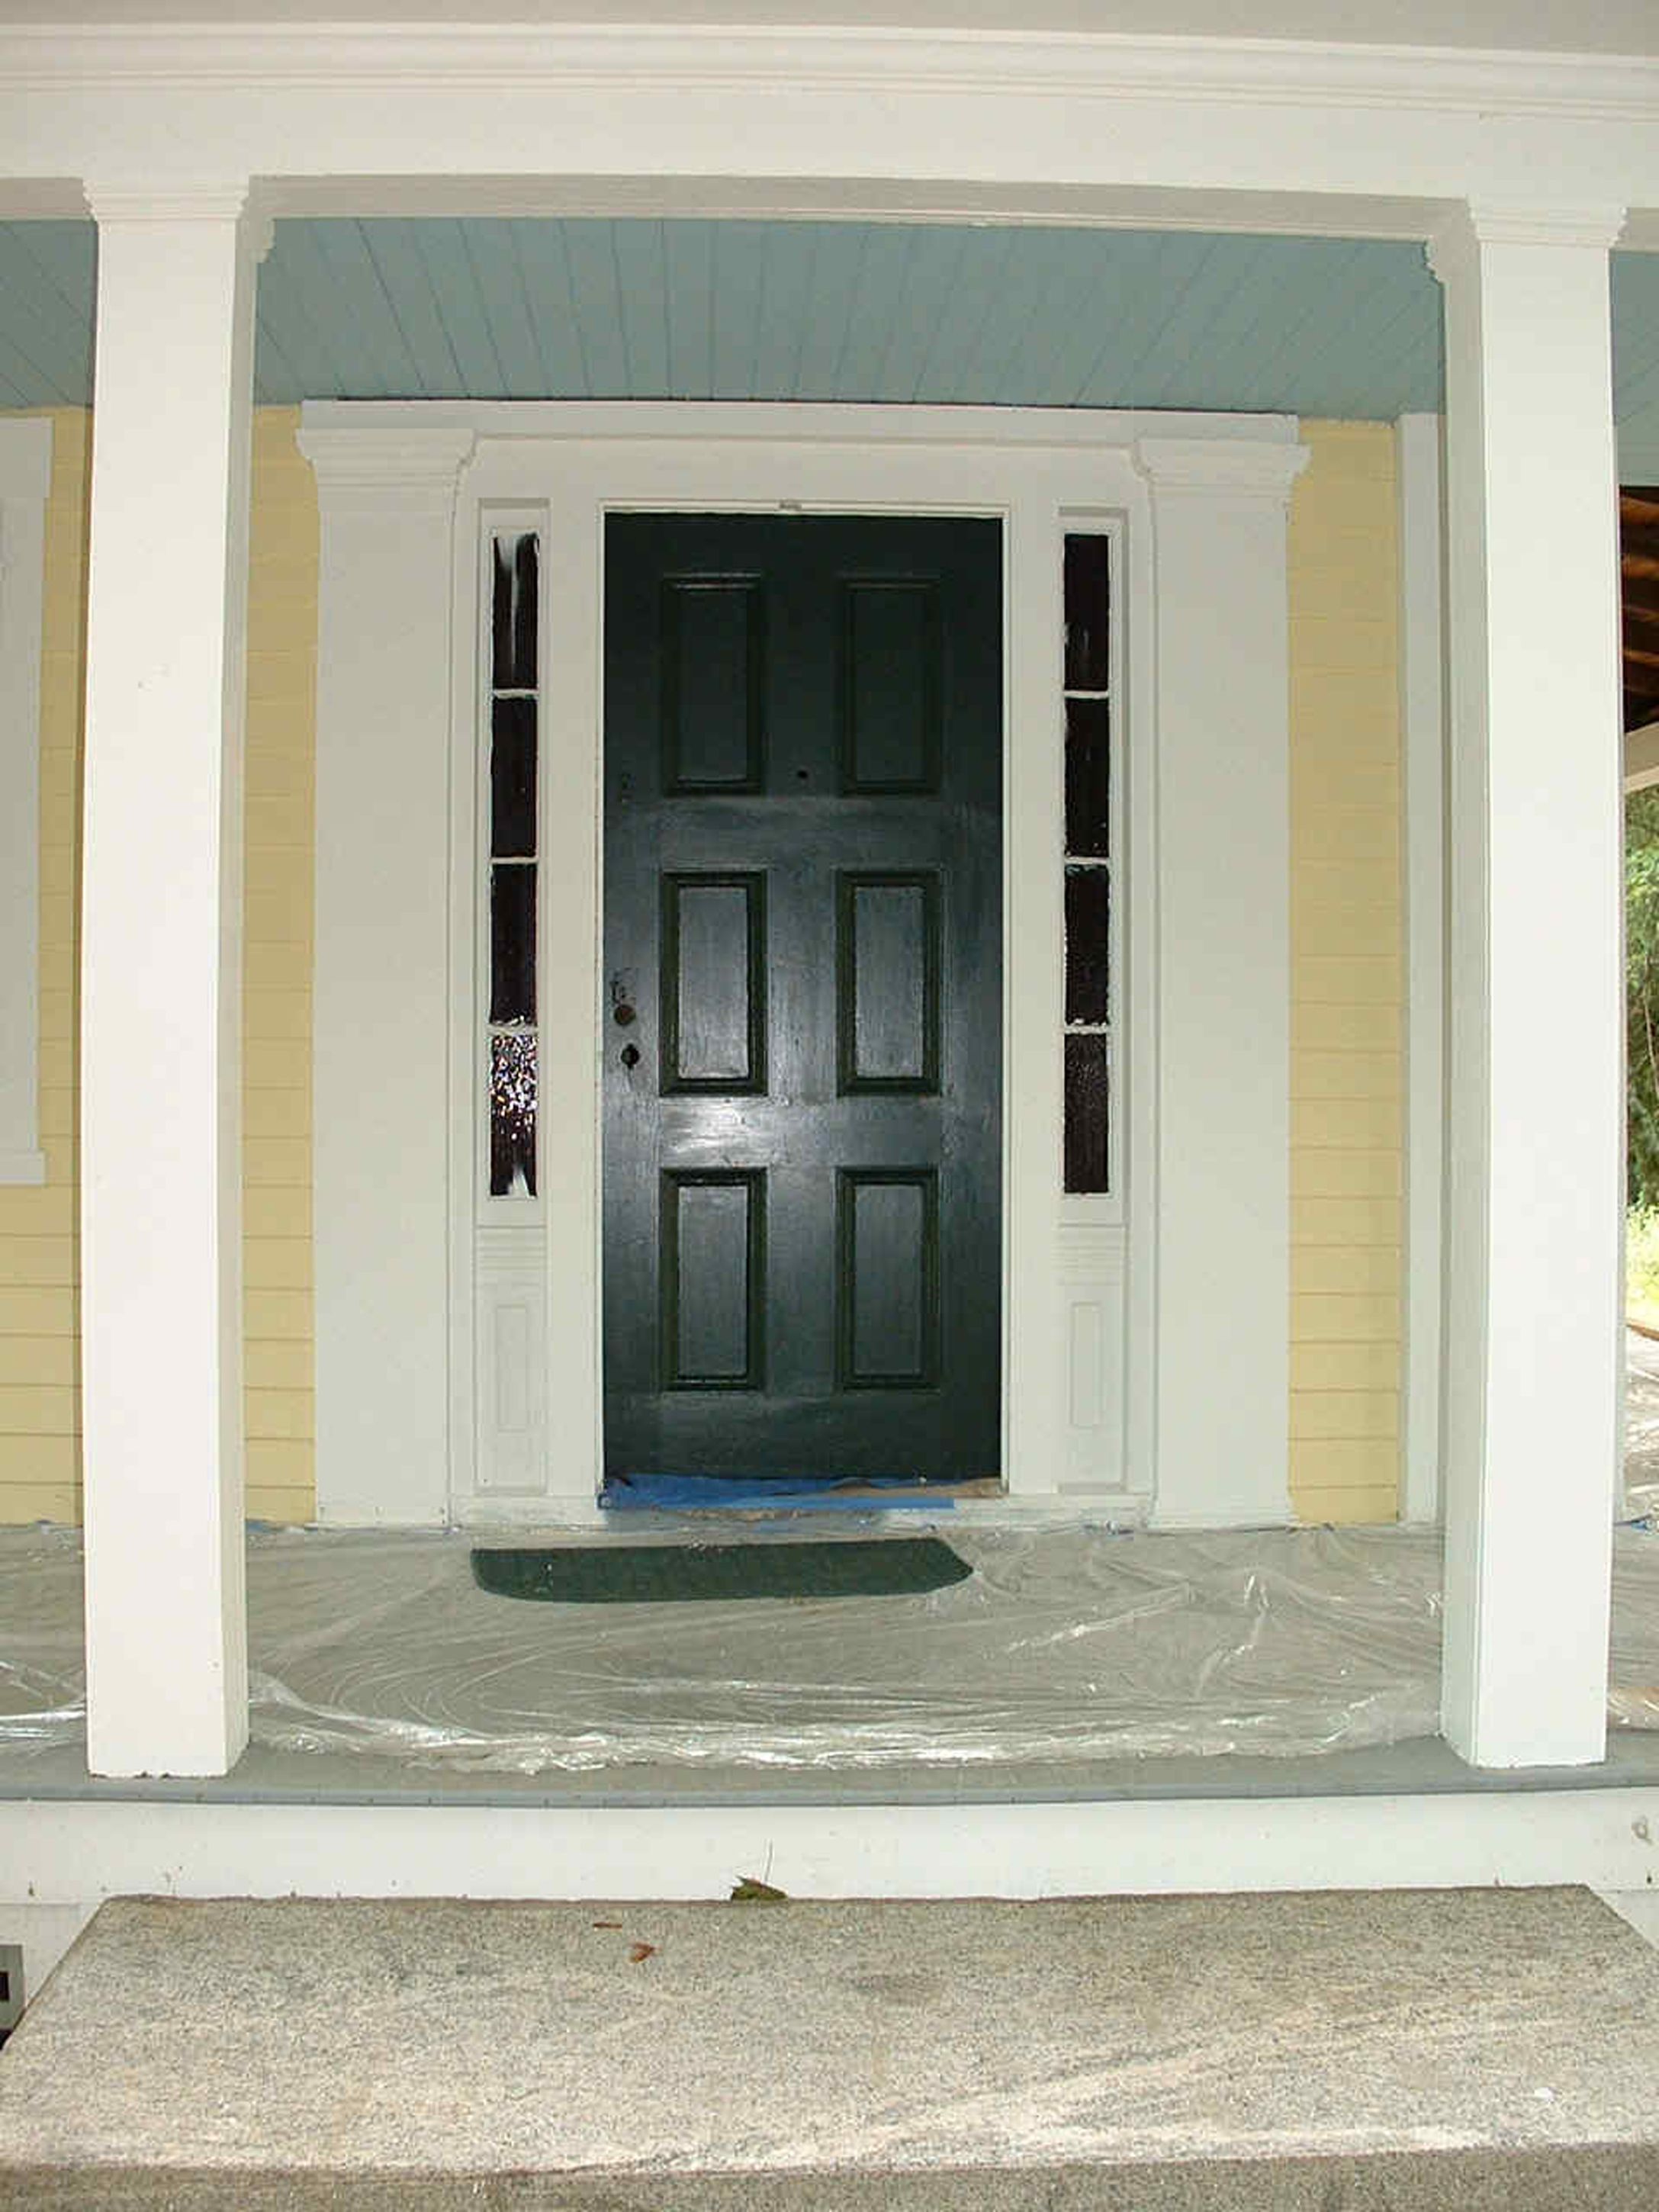 Romantic Black Front Entry Door With Yellow Wall Color With White Accents And Gray Floor Tile With Green Doormat Together With White Pillars Formidable Front Entry Door Designs (View 11 of 39)